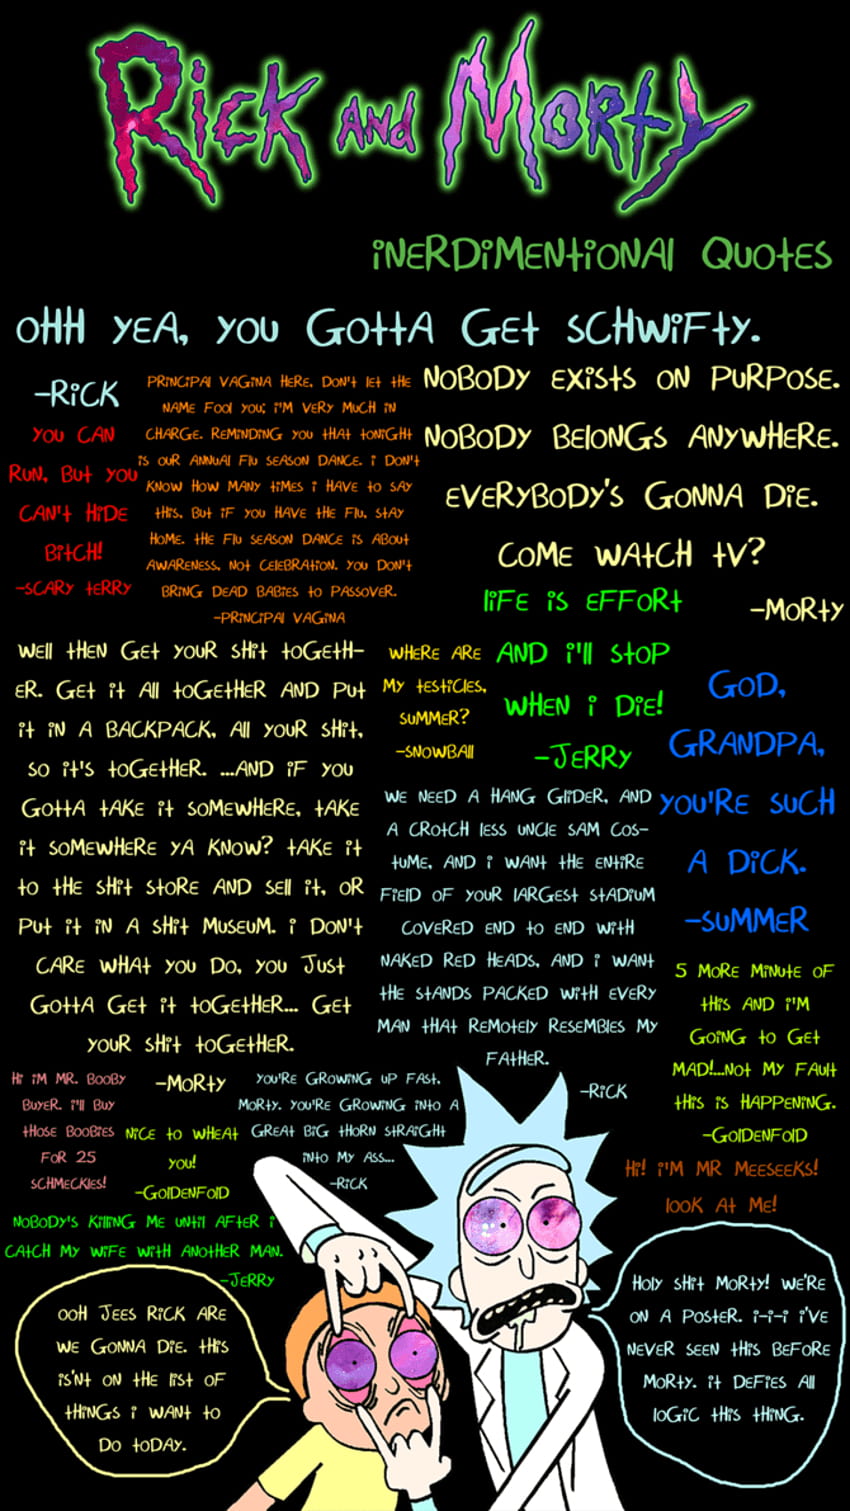 3 Quotes: 20 Quotes that Prove Rick Is the Best and Worst, rick and morty quotes HD phone wallpaper